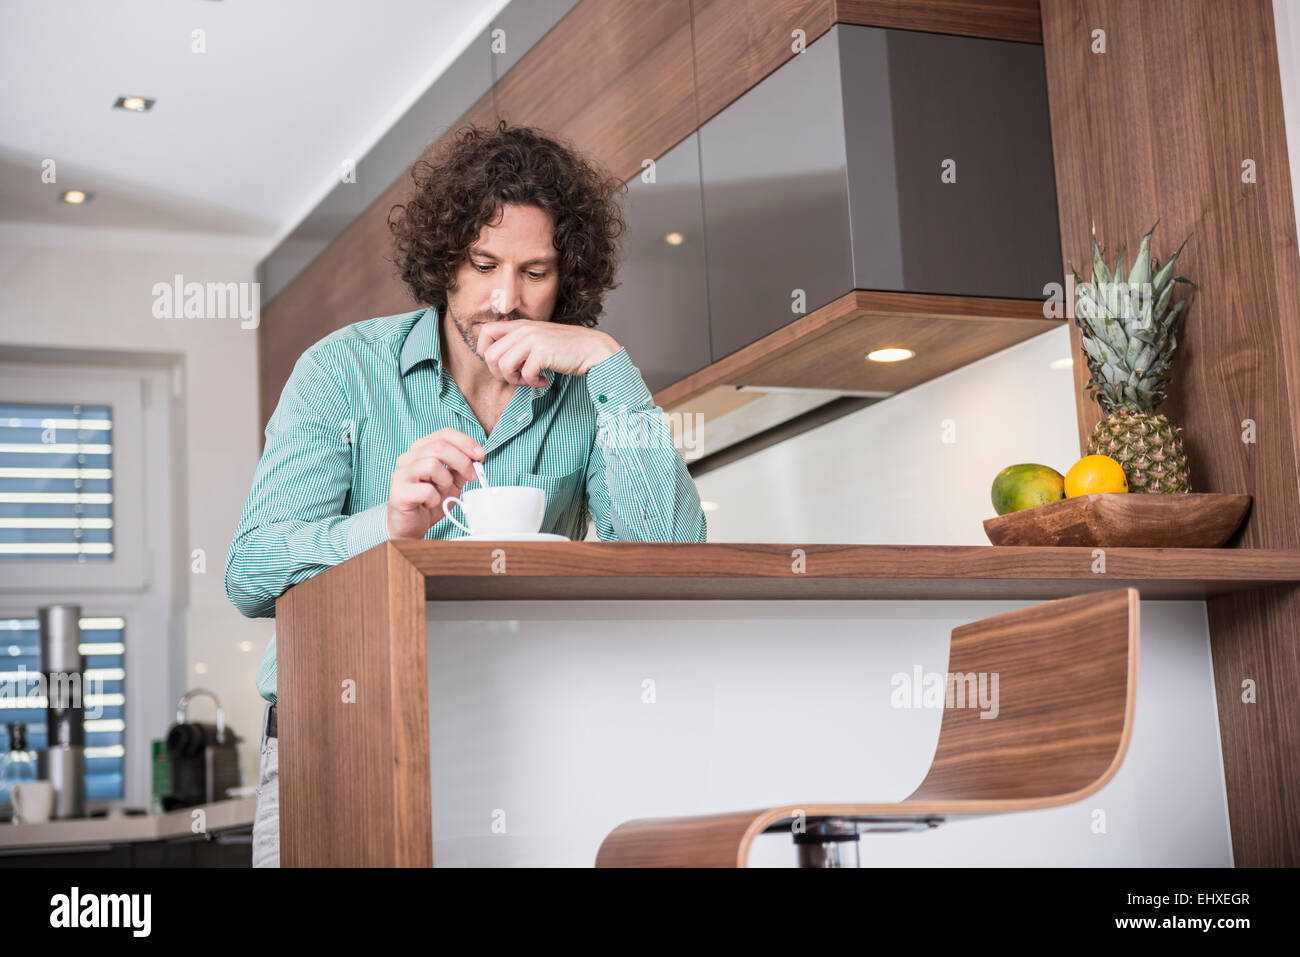 Man drinking cup of coffee in a kitchen, Munich, Bavaria, Germany Stock Photo